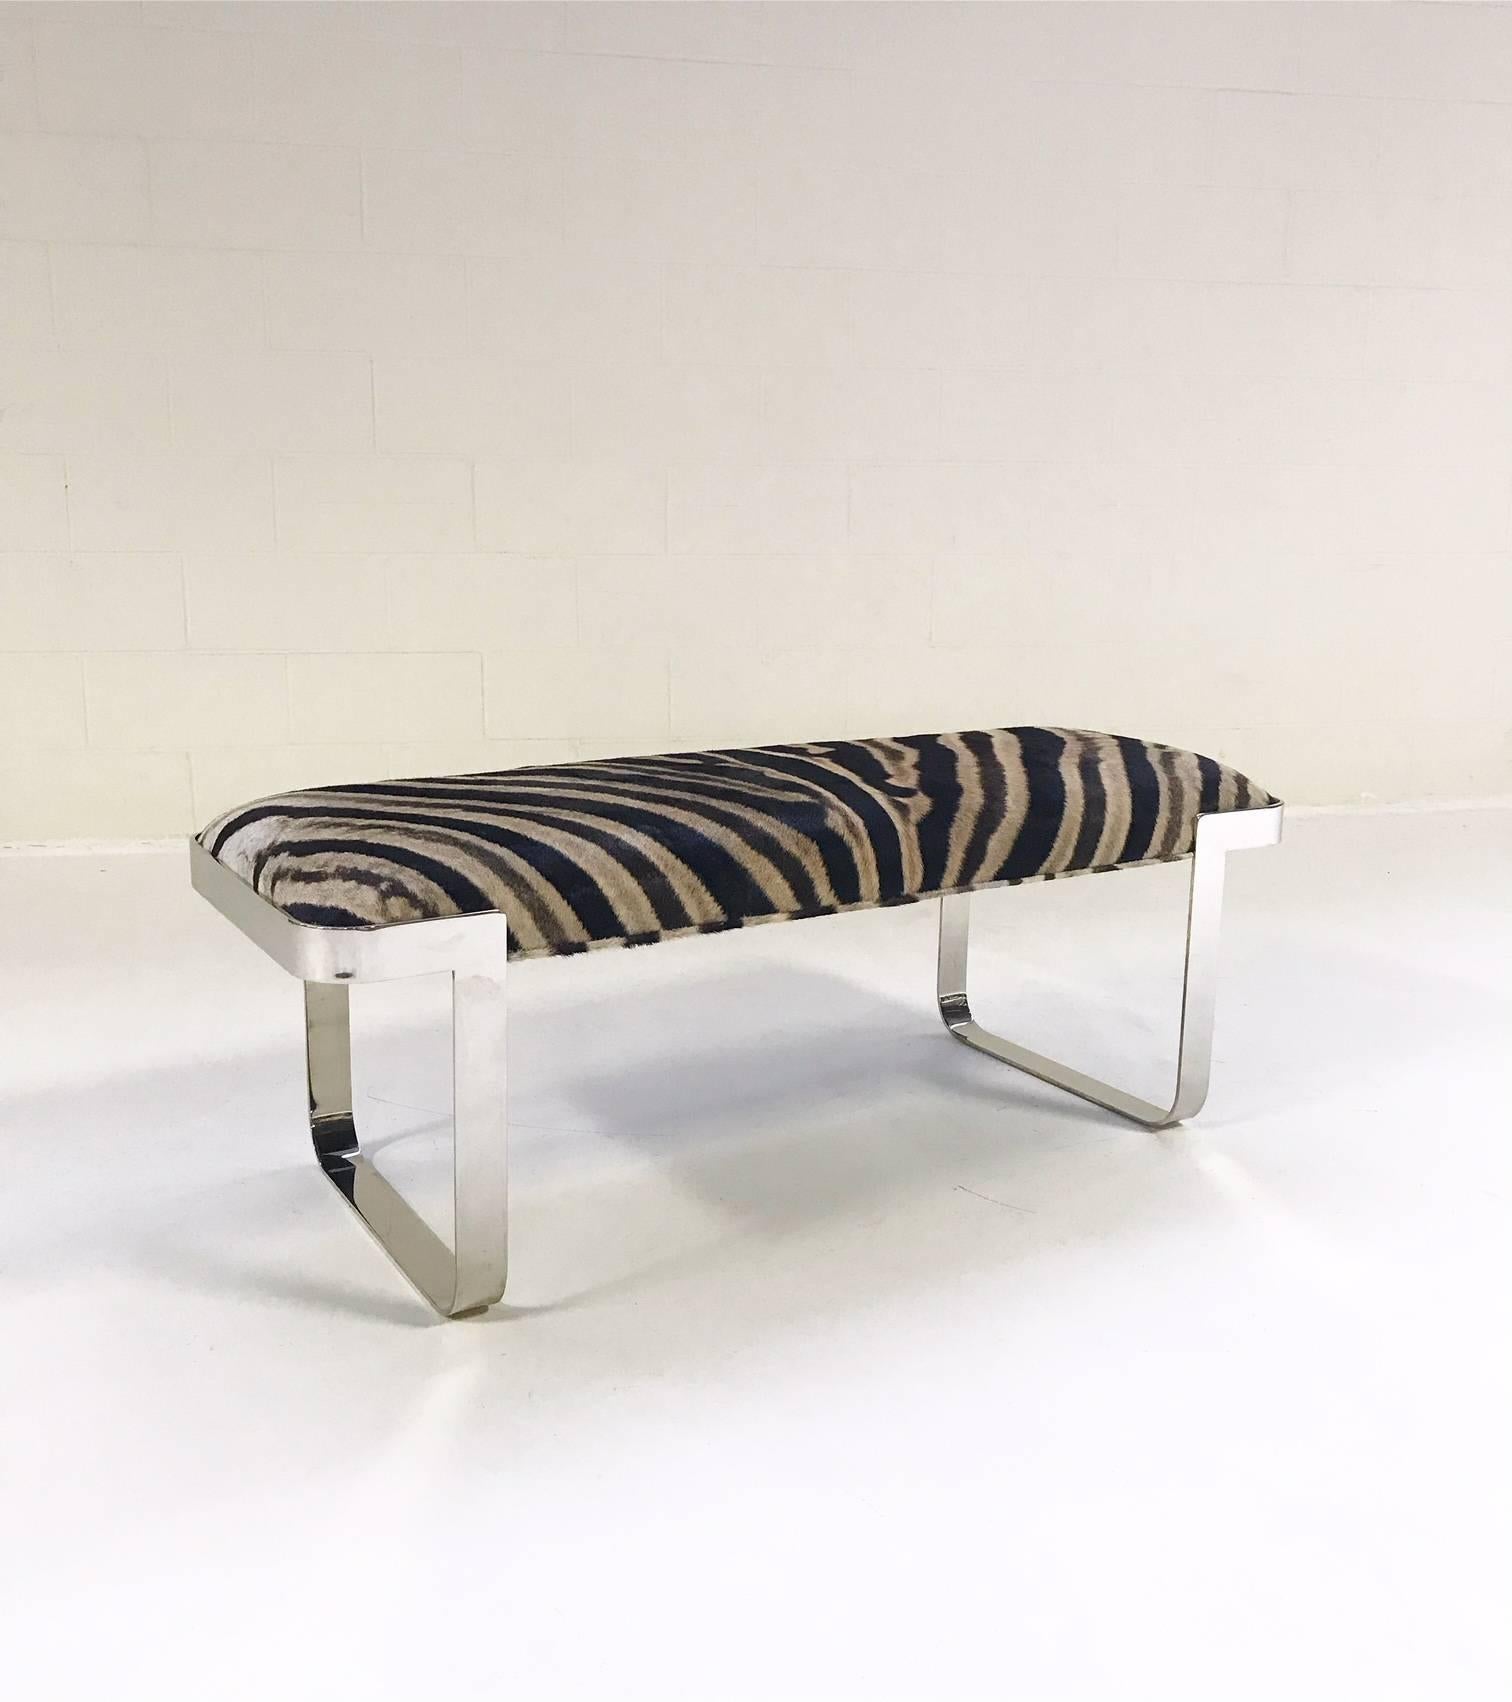 We keep picturing this amazing bench at the end of a beautiful bed. Our designers chose a zebra hide with undertones of slivery grey to pair perfectly with the slick and shiny chrome.

Measures: 49